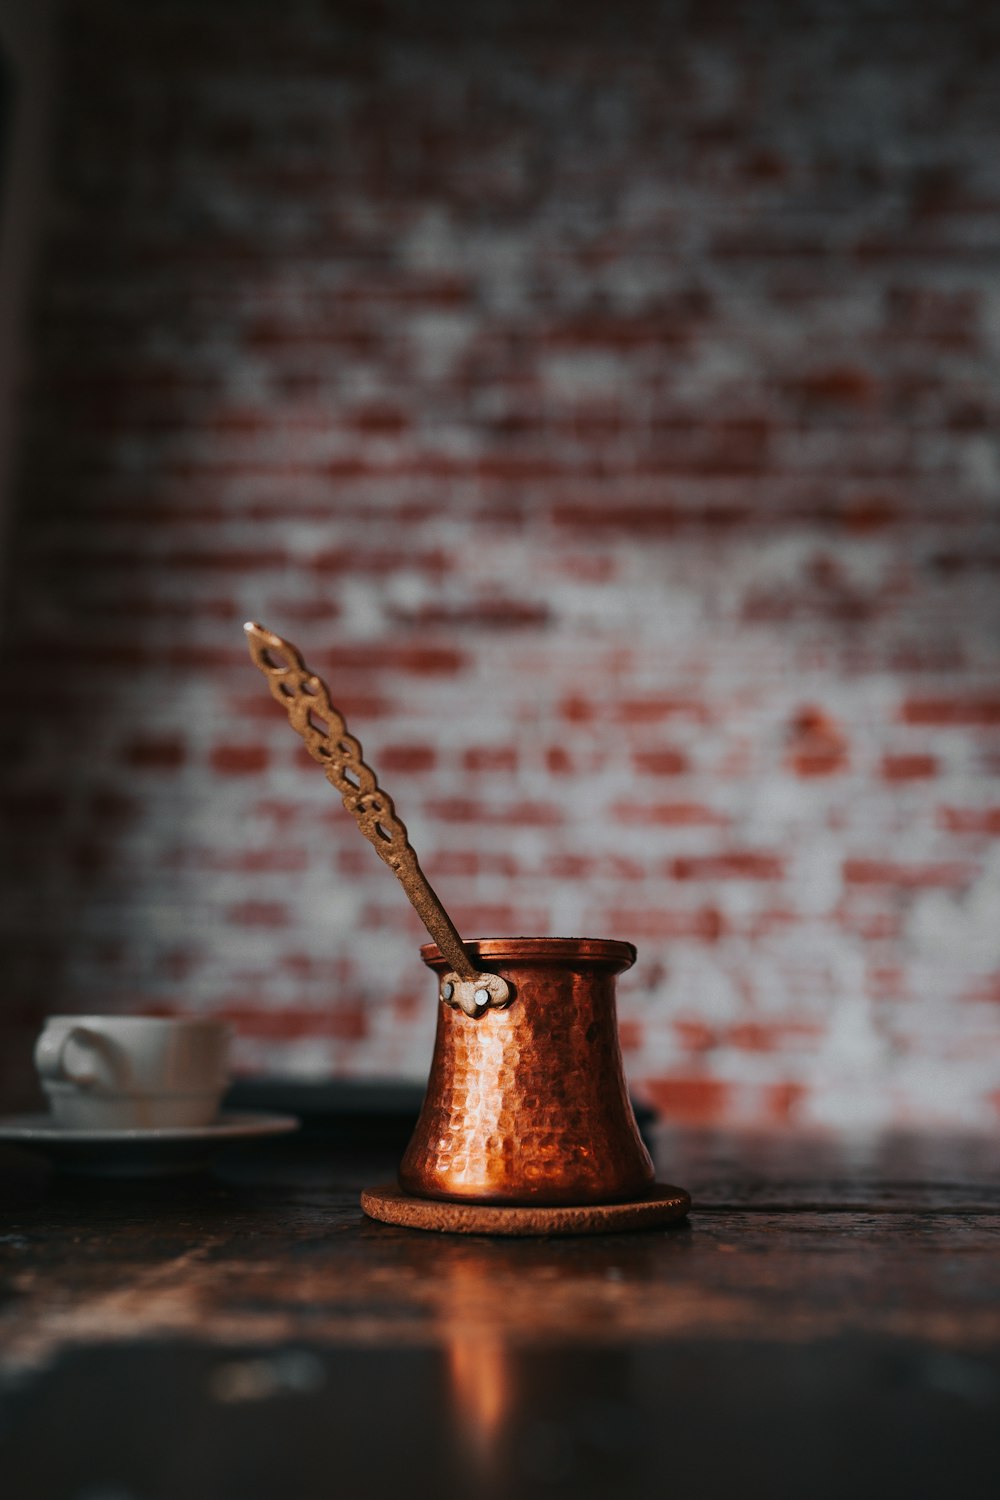 a wooden spoon in a copper cup on a table